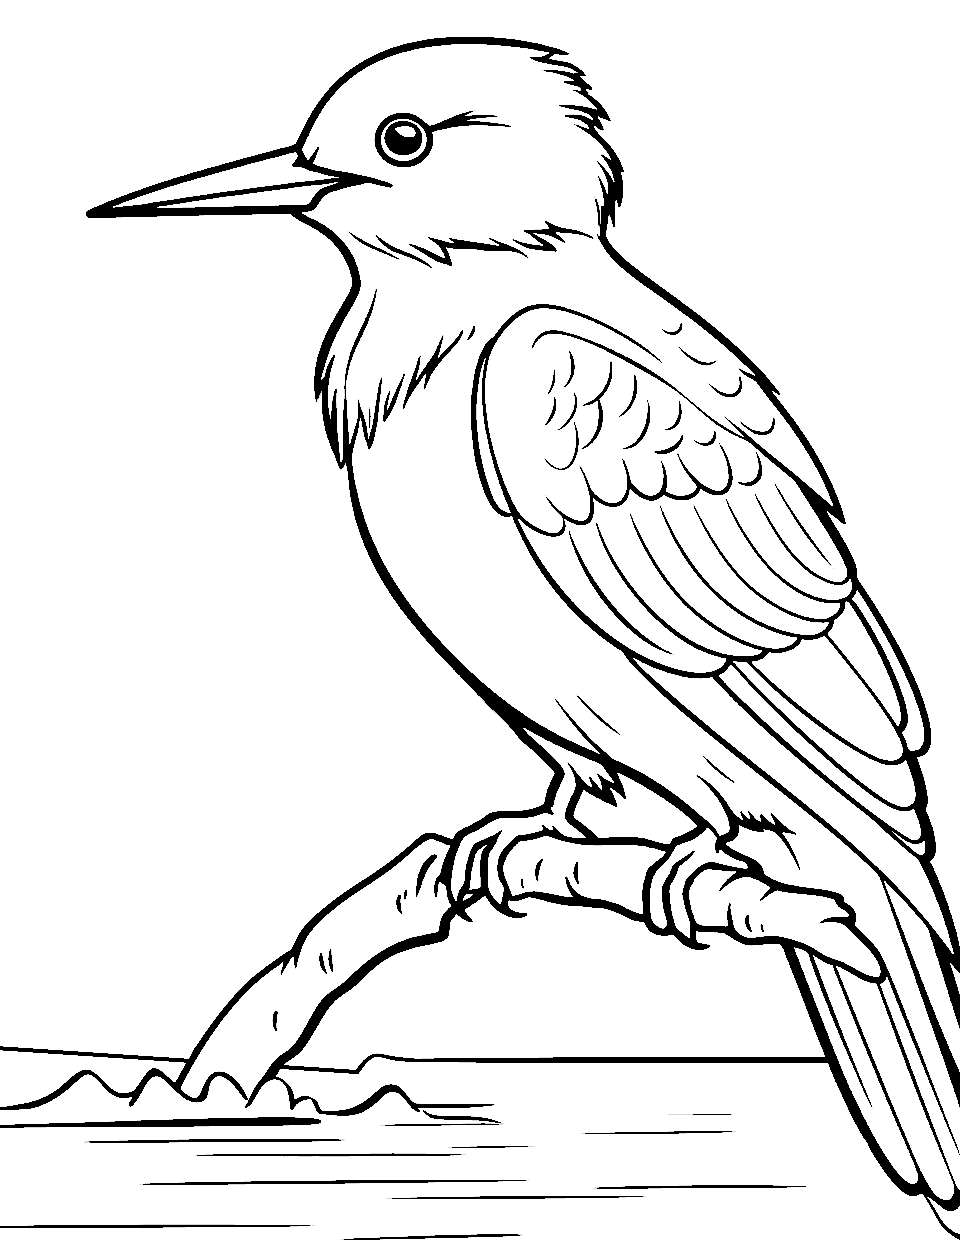 Kingfisher's Riverside Rest Coloring Page - A kingfisher resting by a serene riverbank.